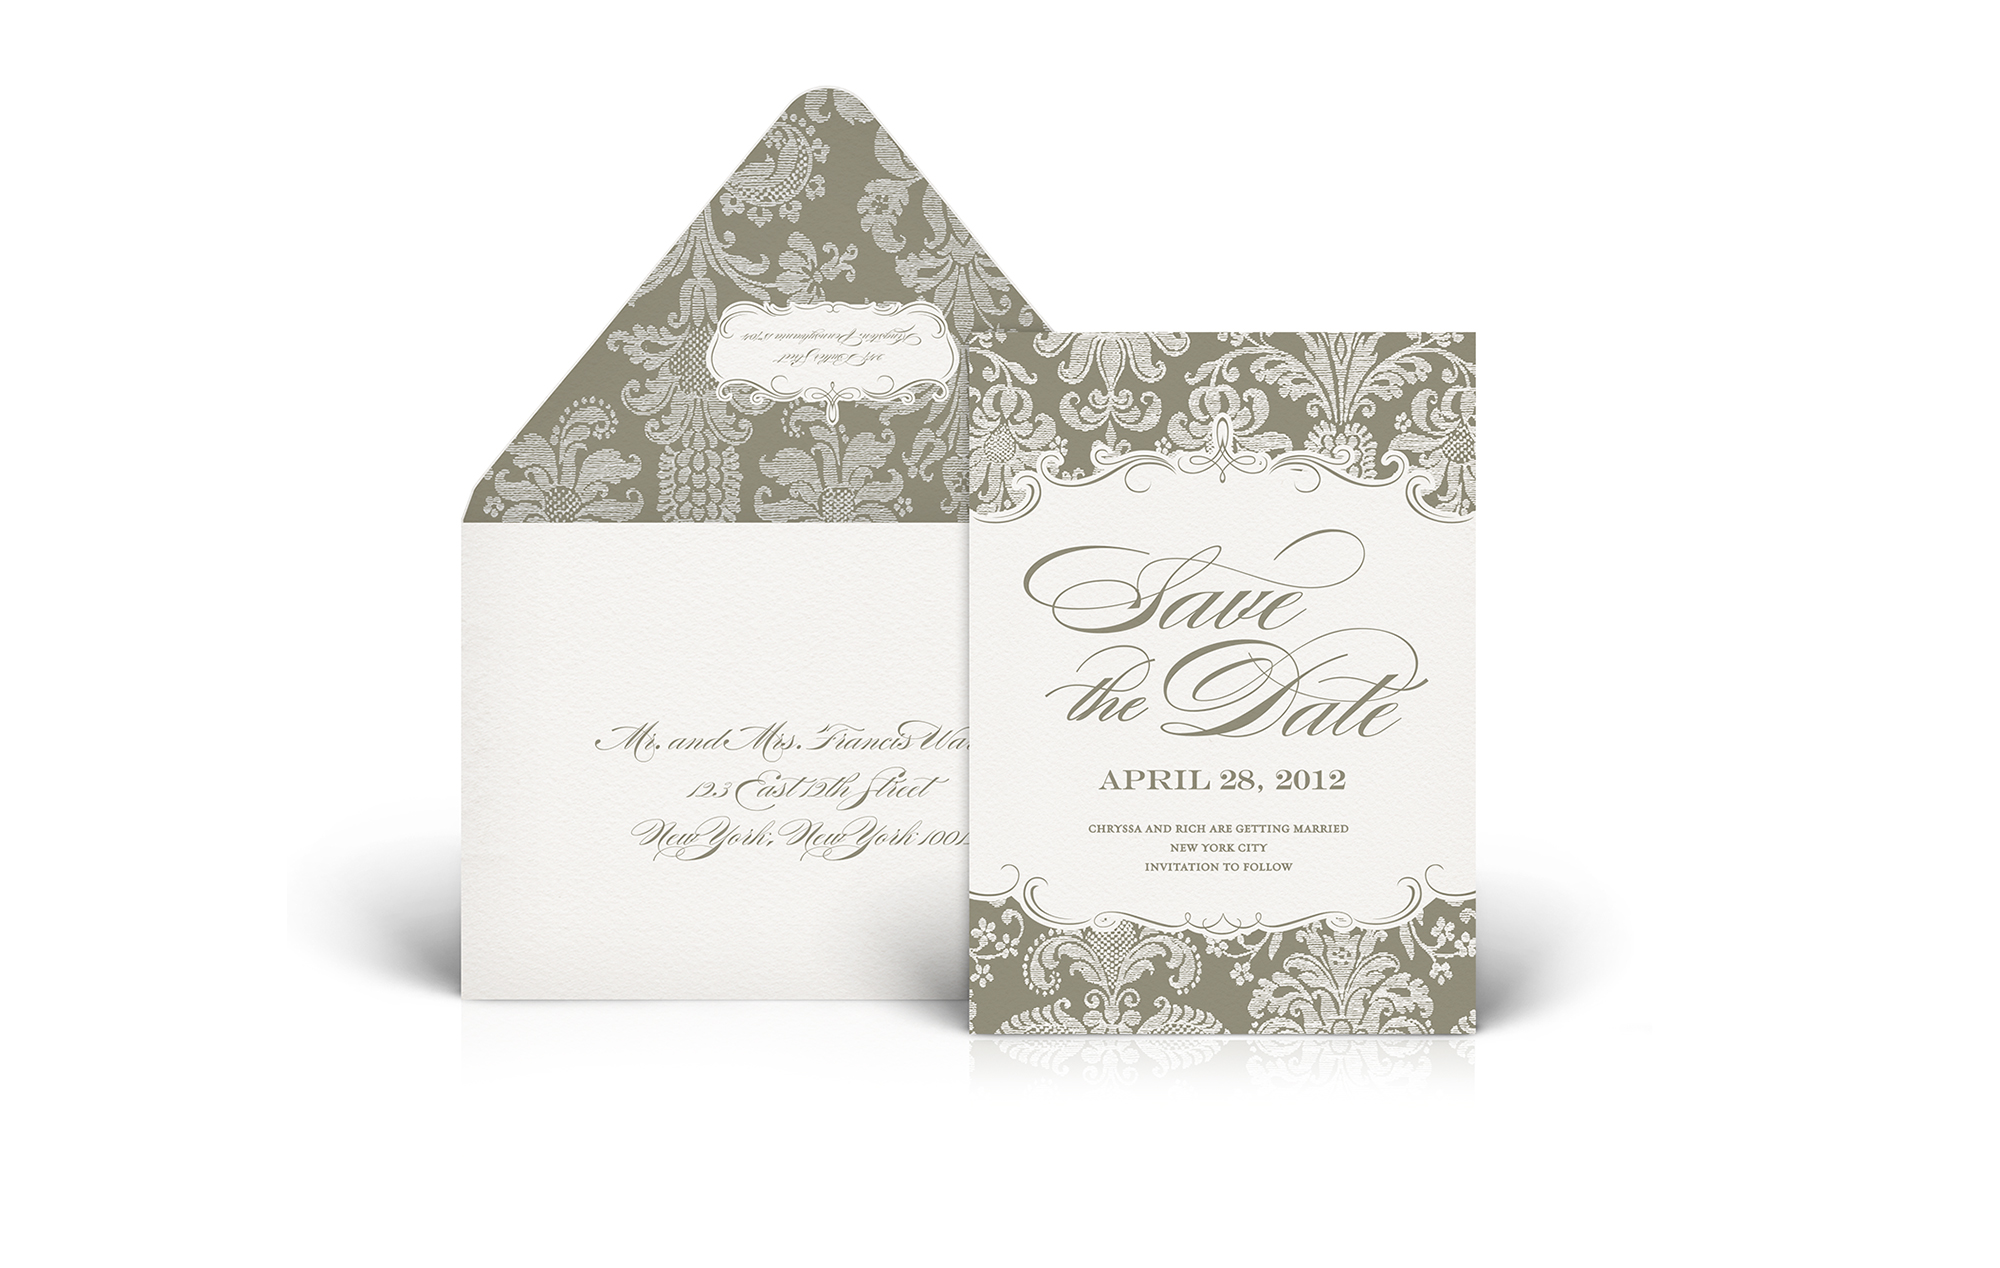 Damask print save the date